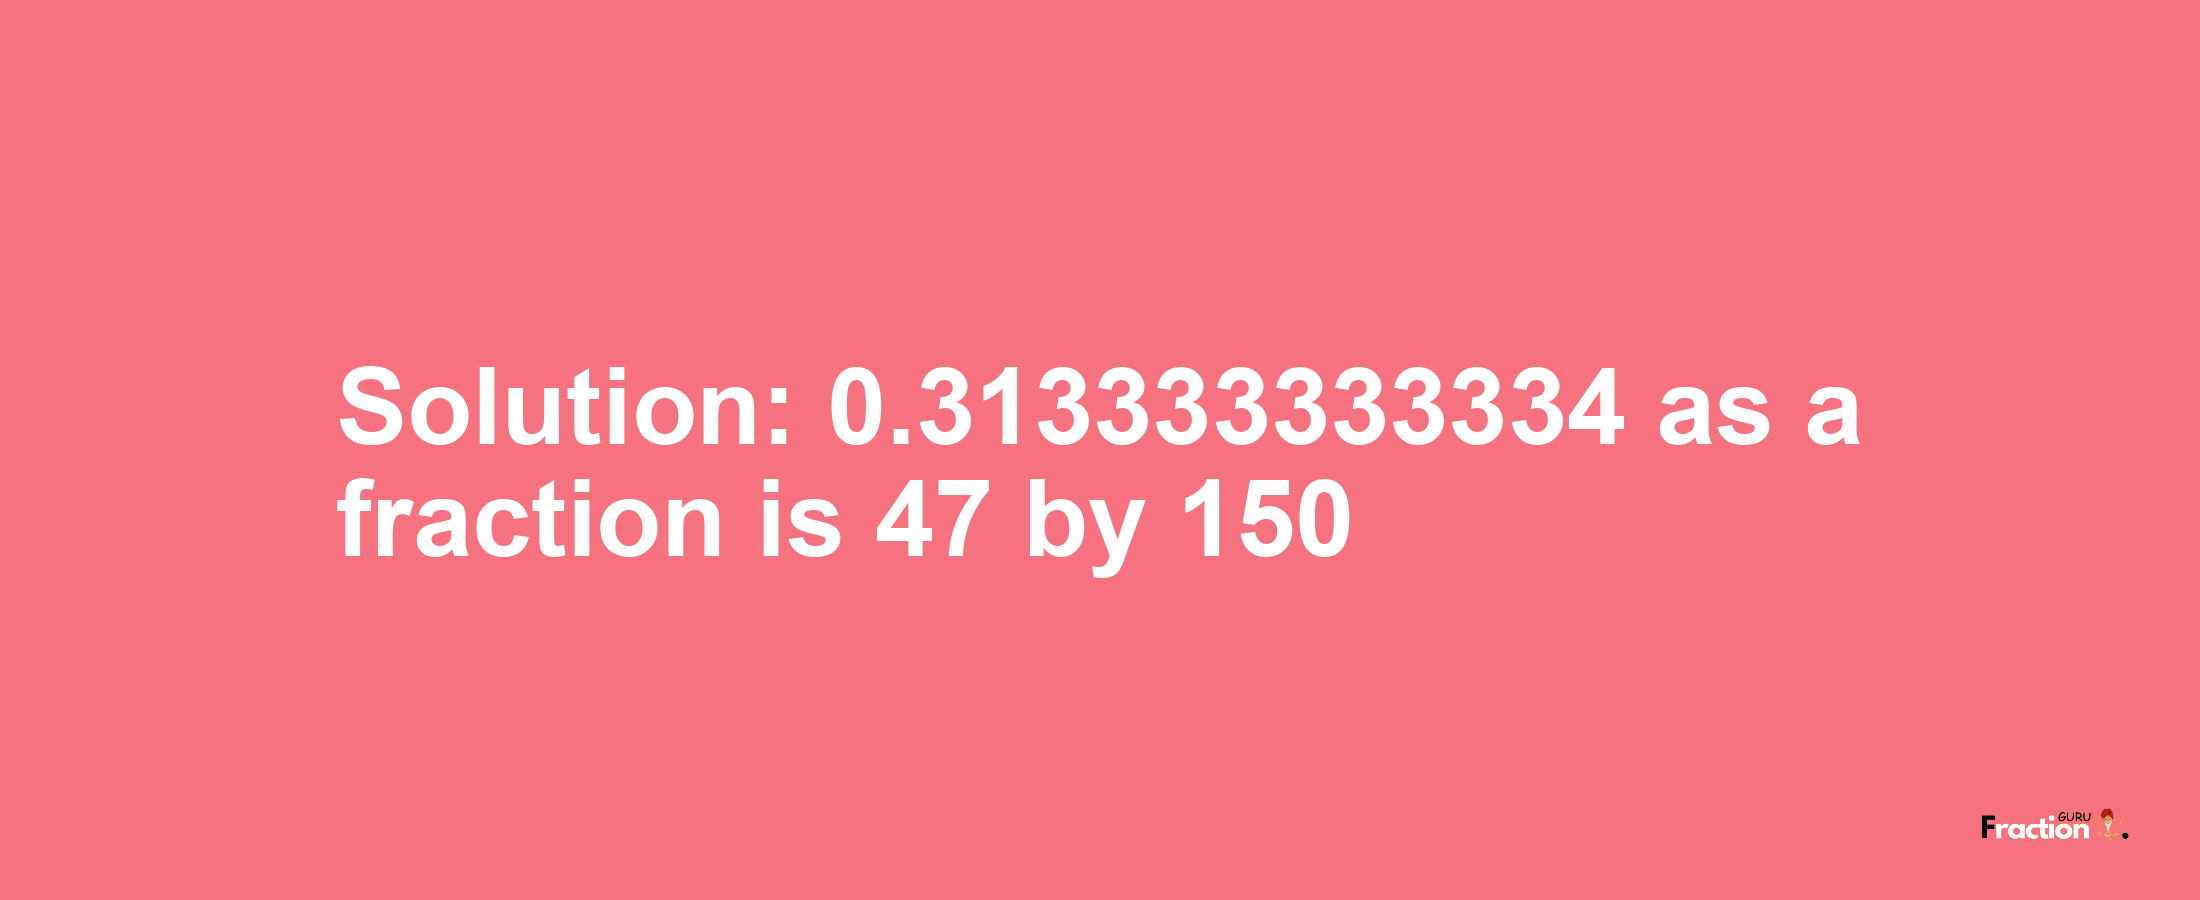 Solution:0.313333333334 as a fraction is 47/150